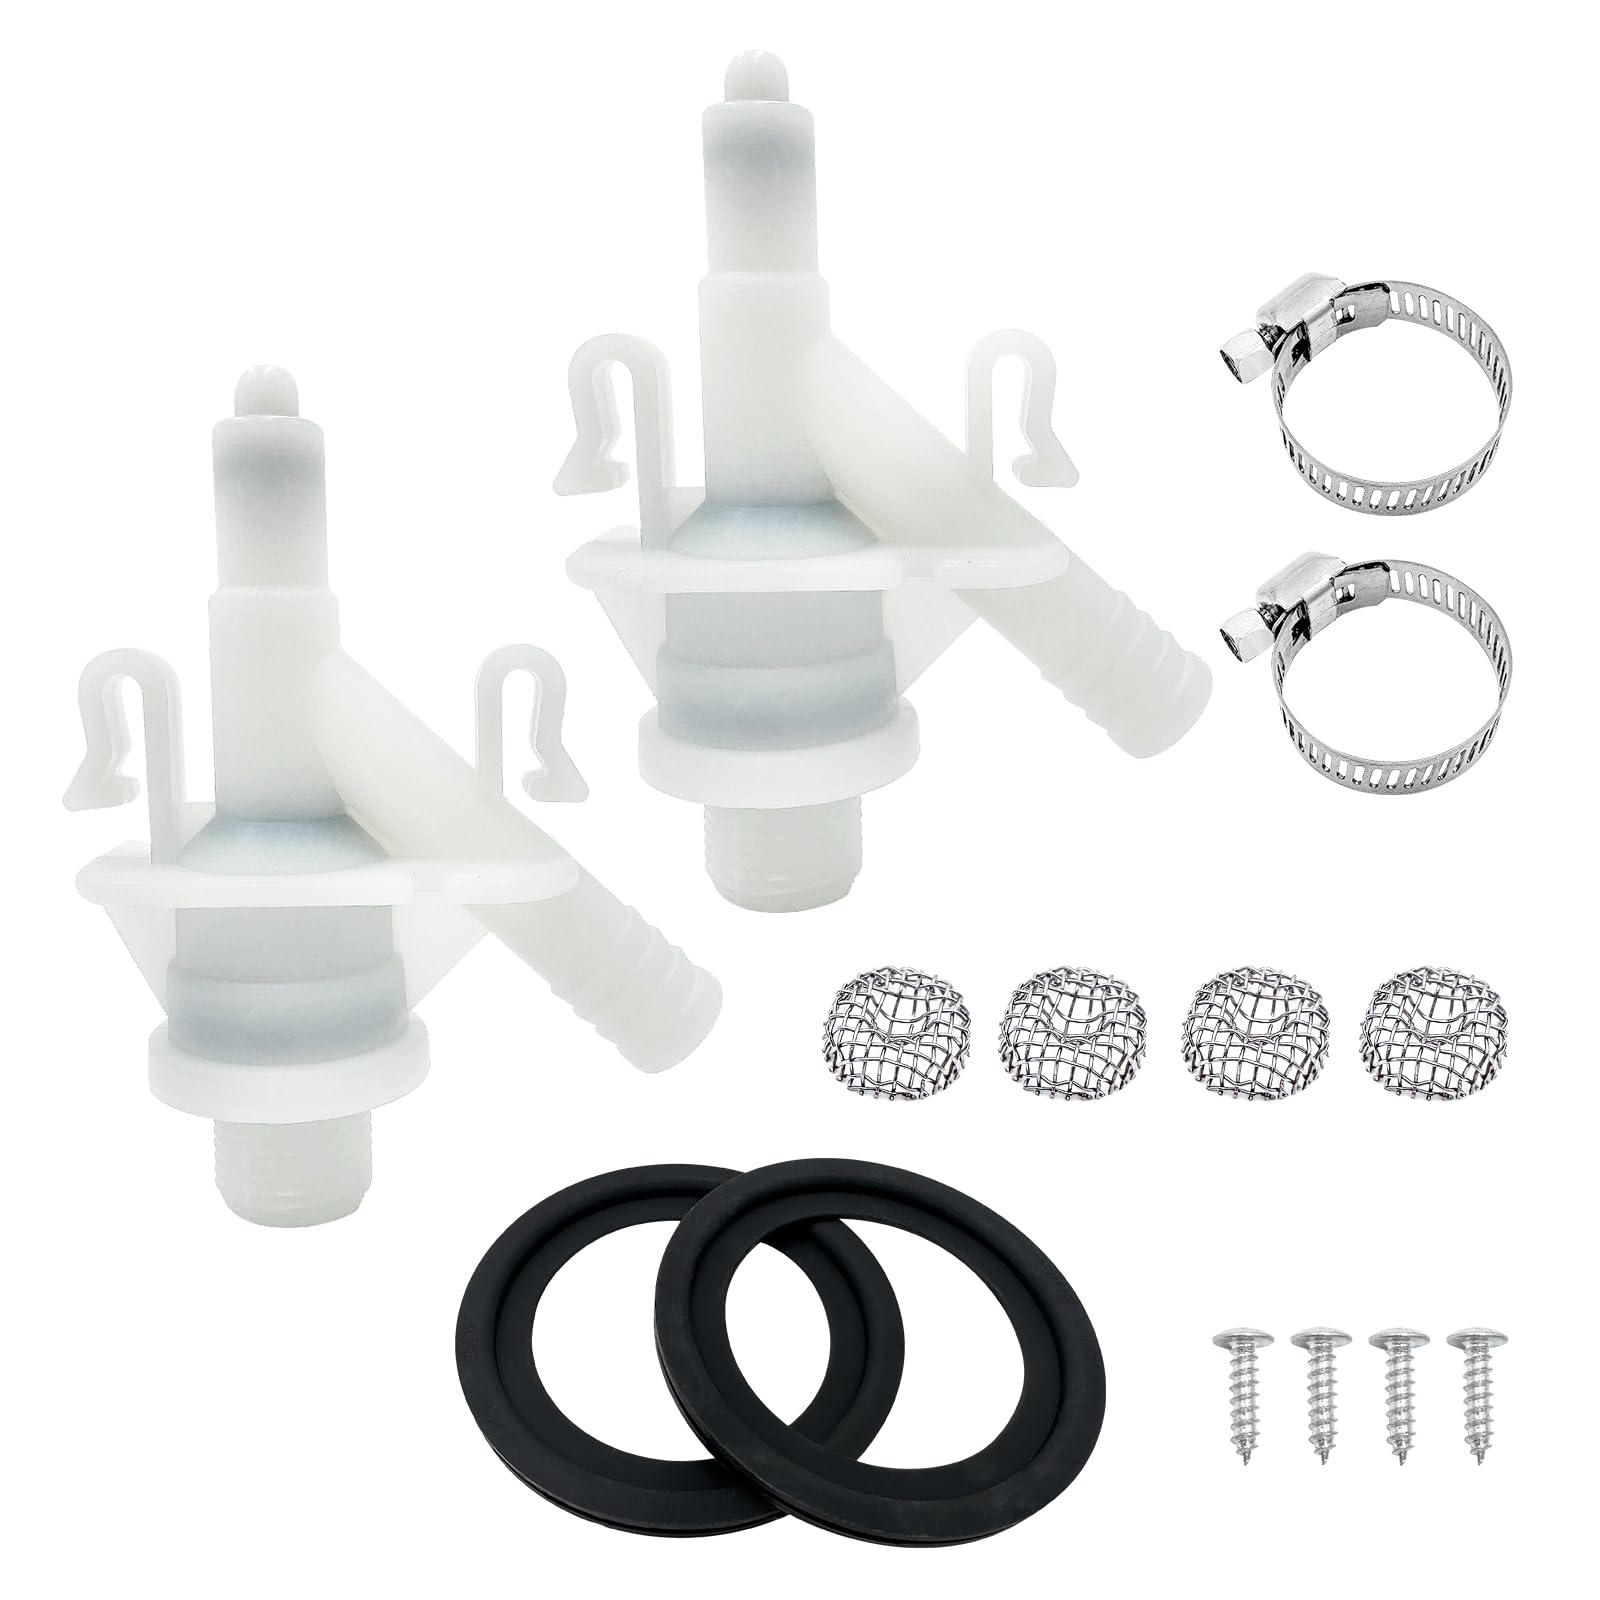 2PCS 385311641 Water Valve Kit for Sealand and Dometic Toilets Series 300, 310, 320-YAOAWE